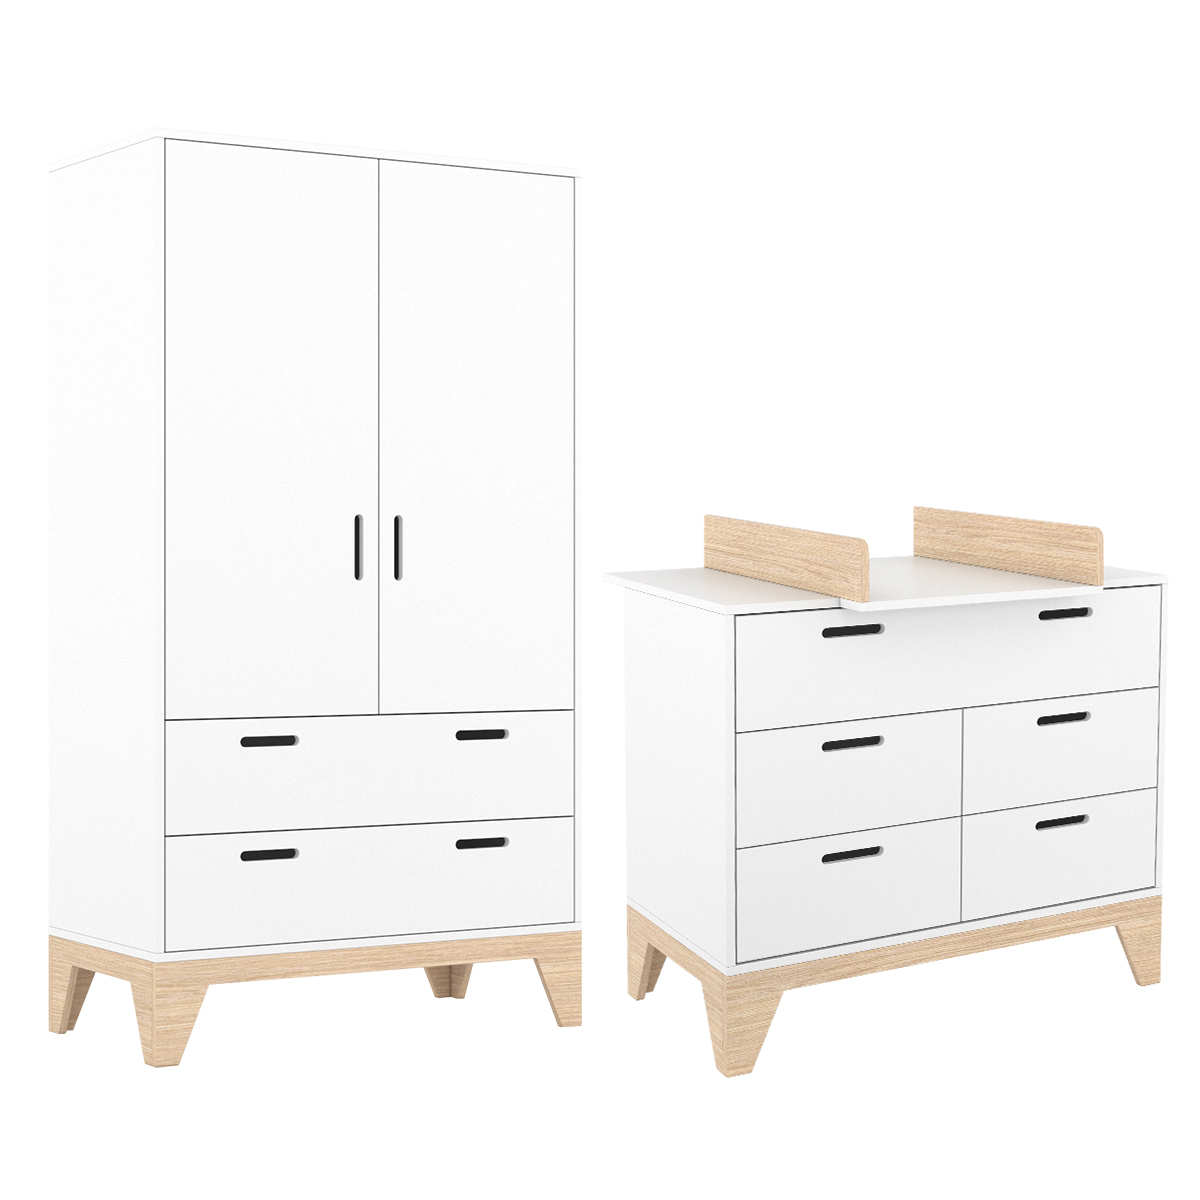 mia_songes_rigolades_pack_commode_armoire_1